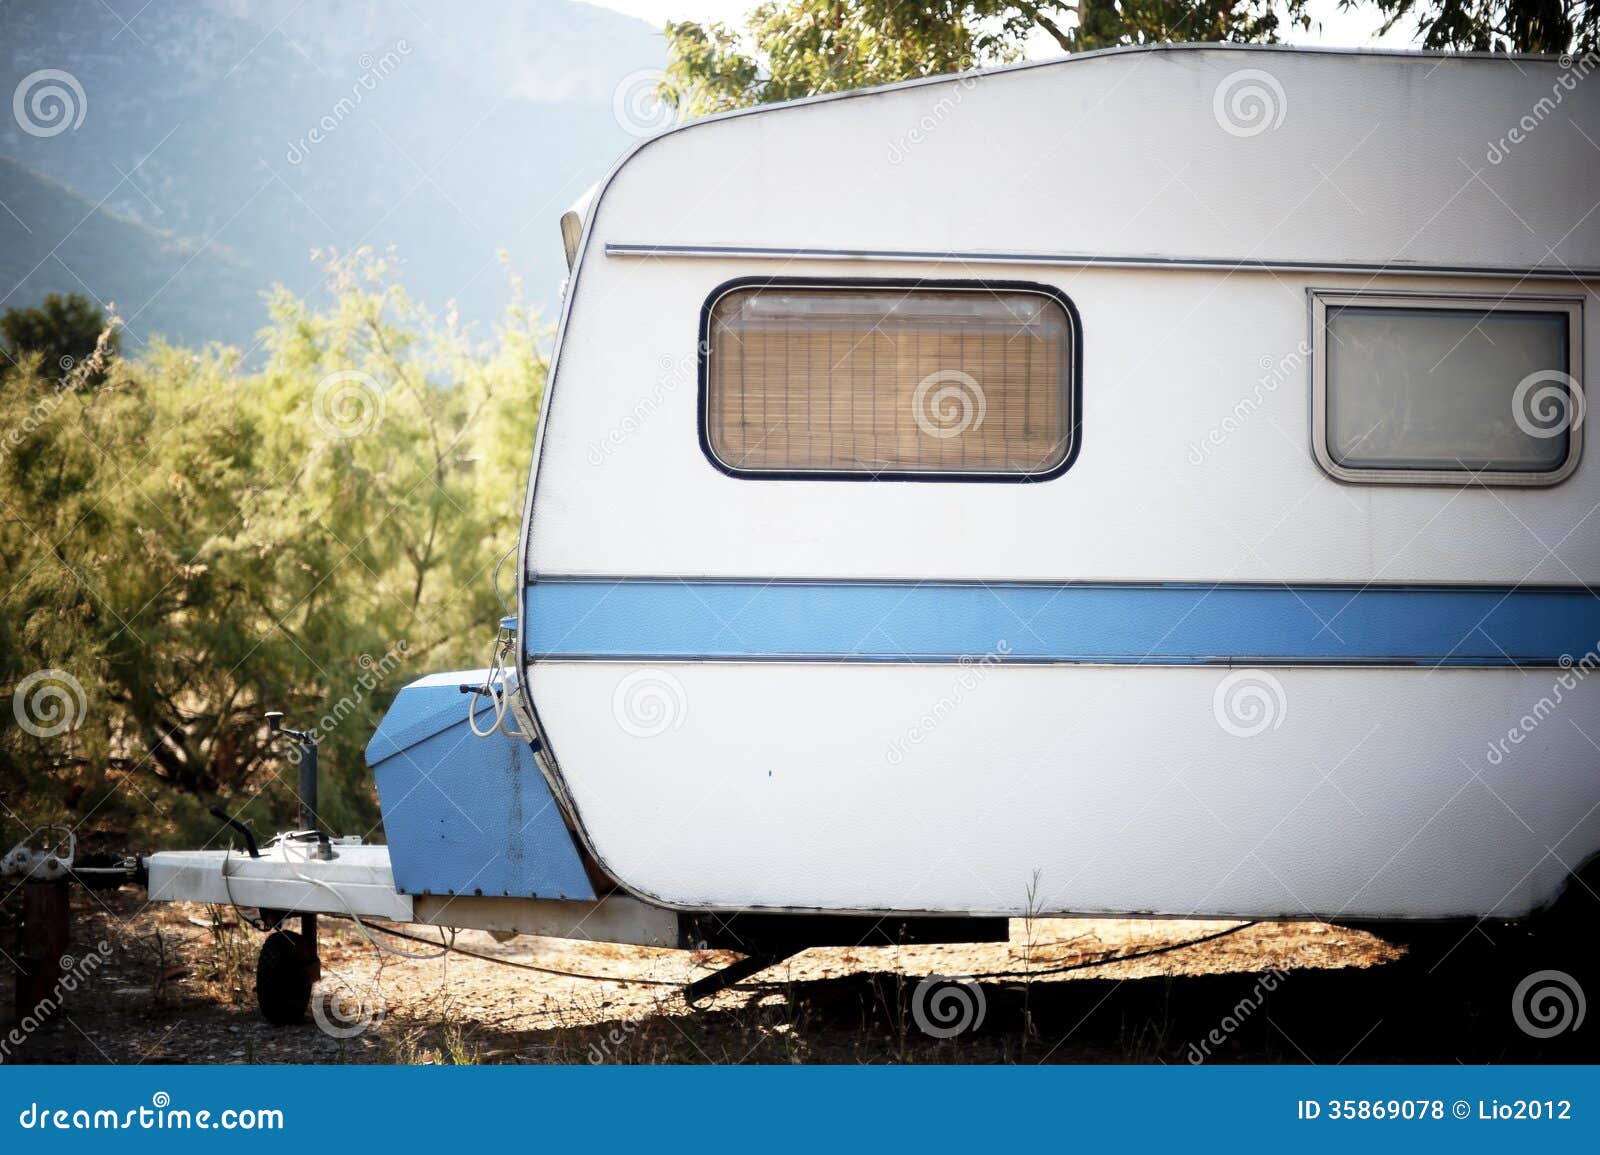 Old caravan stock photo. Image of travel, mobile, outdoors - 35869078